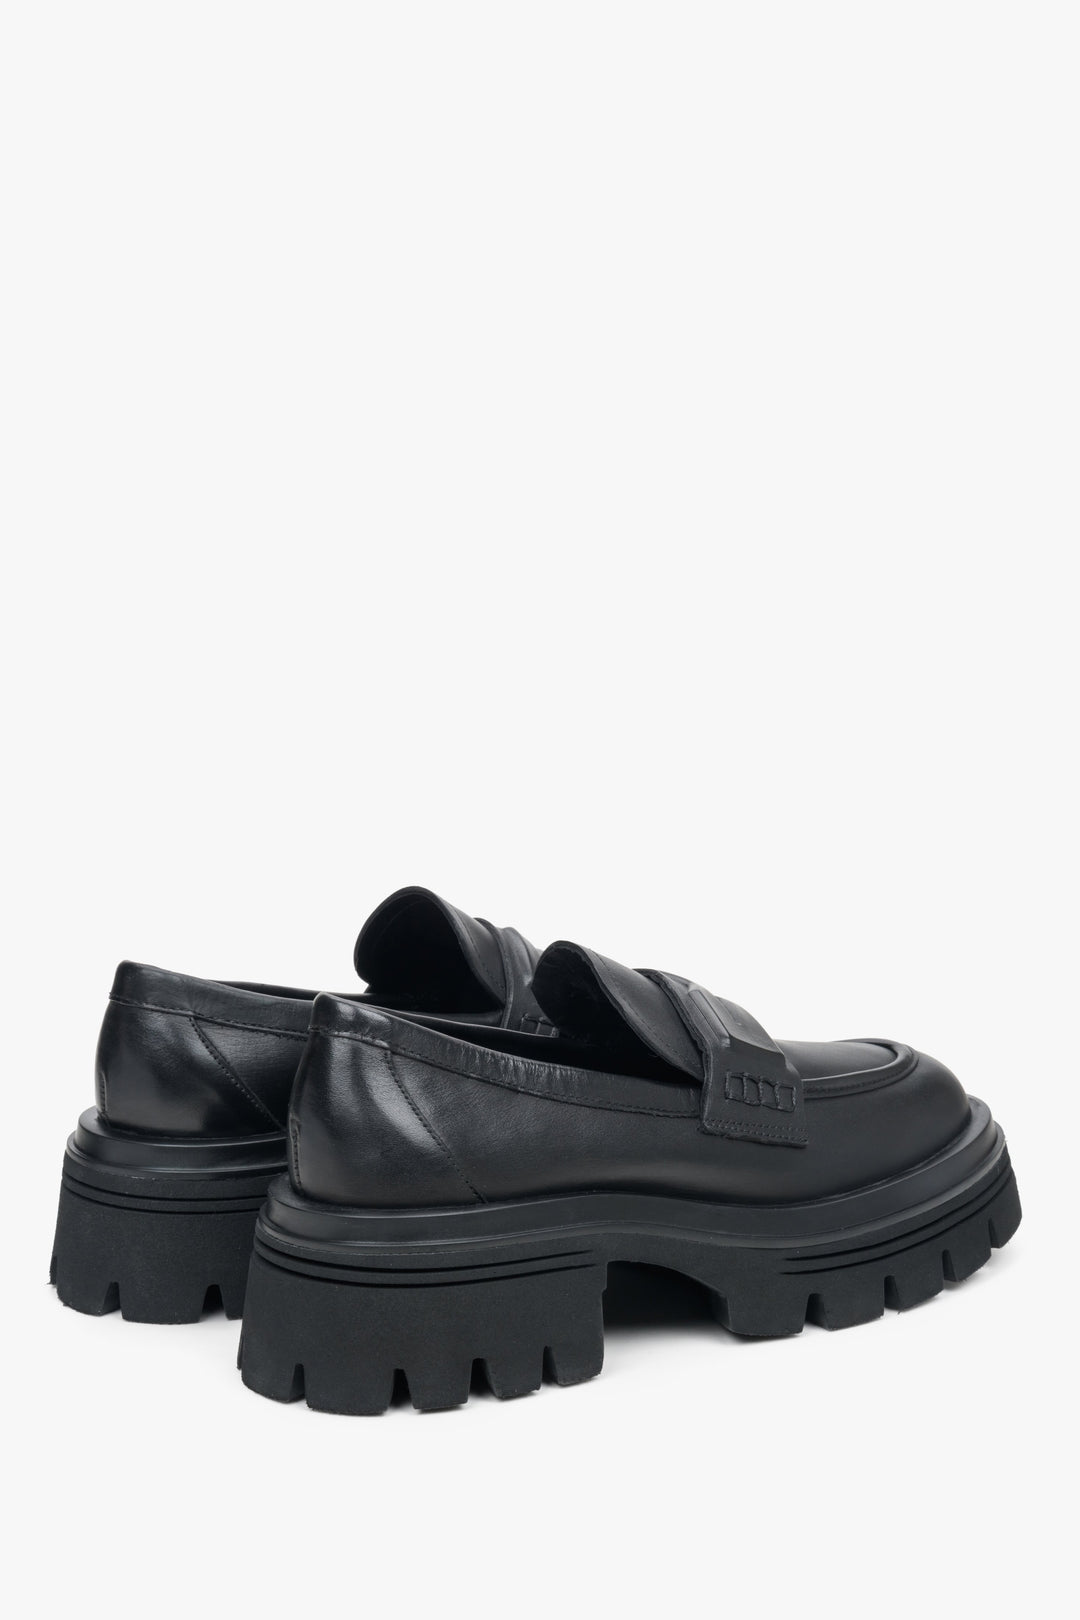 Women's  black Estro leather moccasins - close-up on the heel and side line.